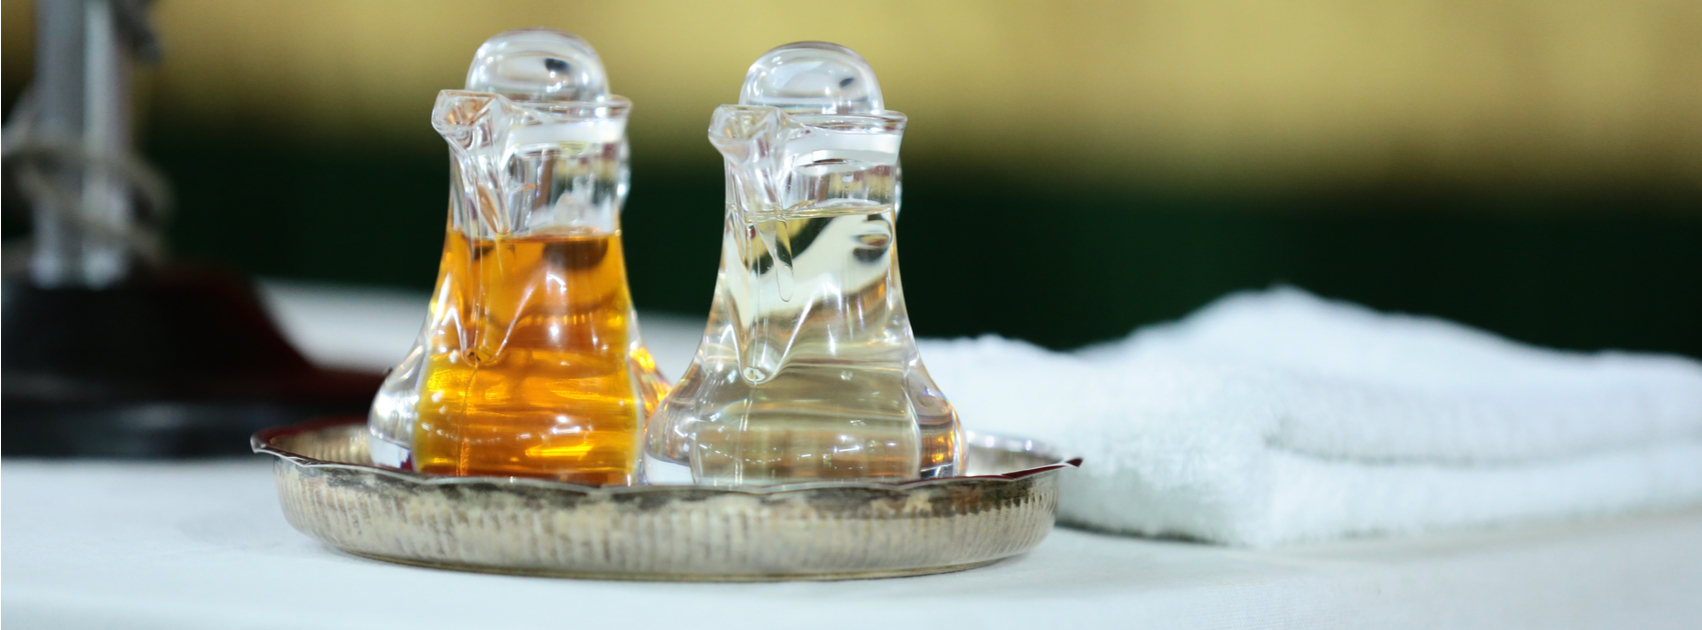 how to apply anointing oil